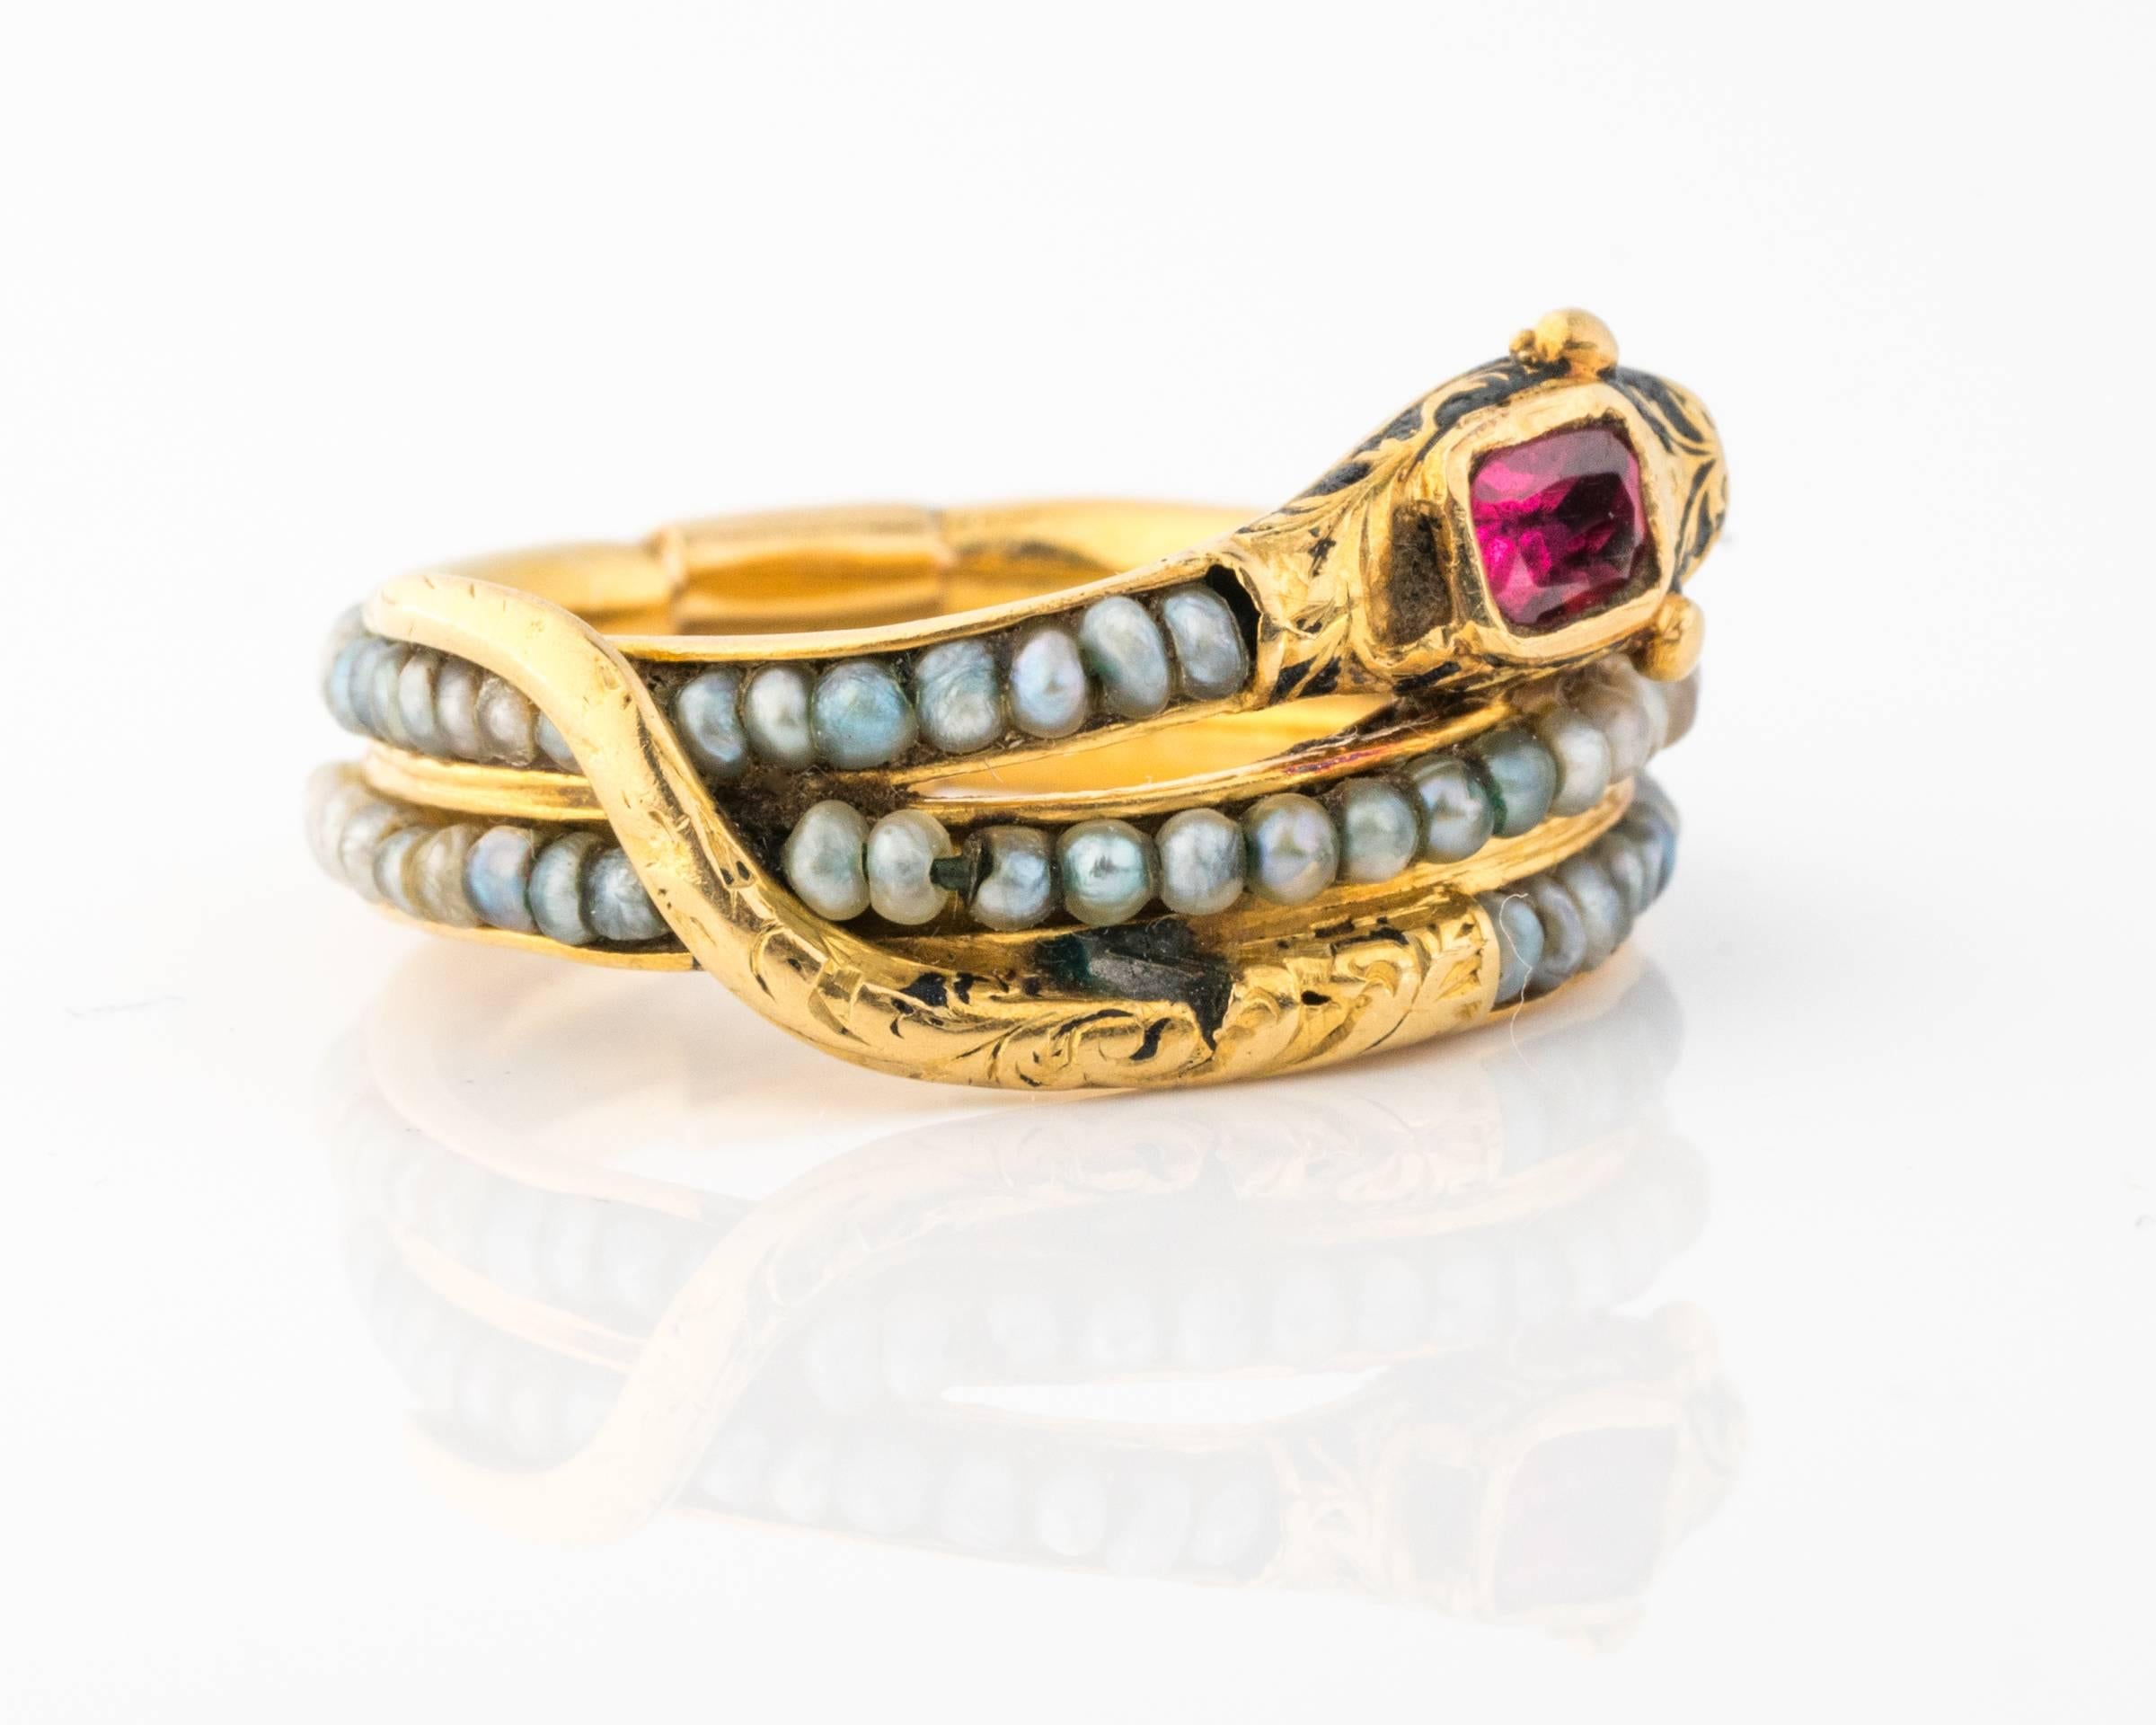 Women's Victorian Era Mourning Serpent Gold Ring Featuring Ruby and Seed Pearls